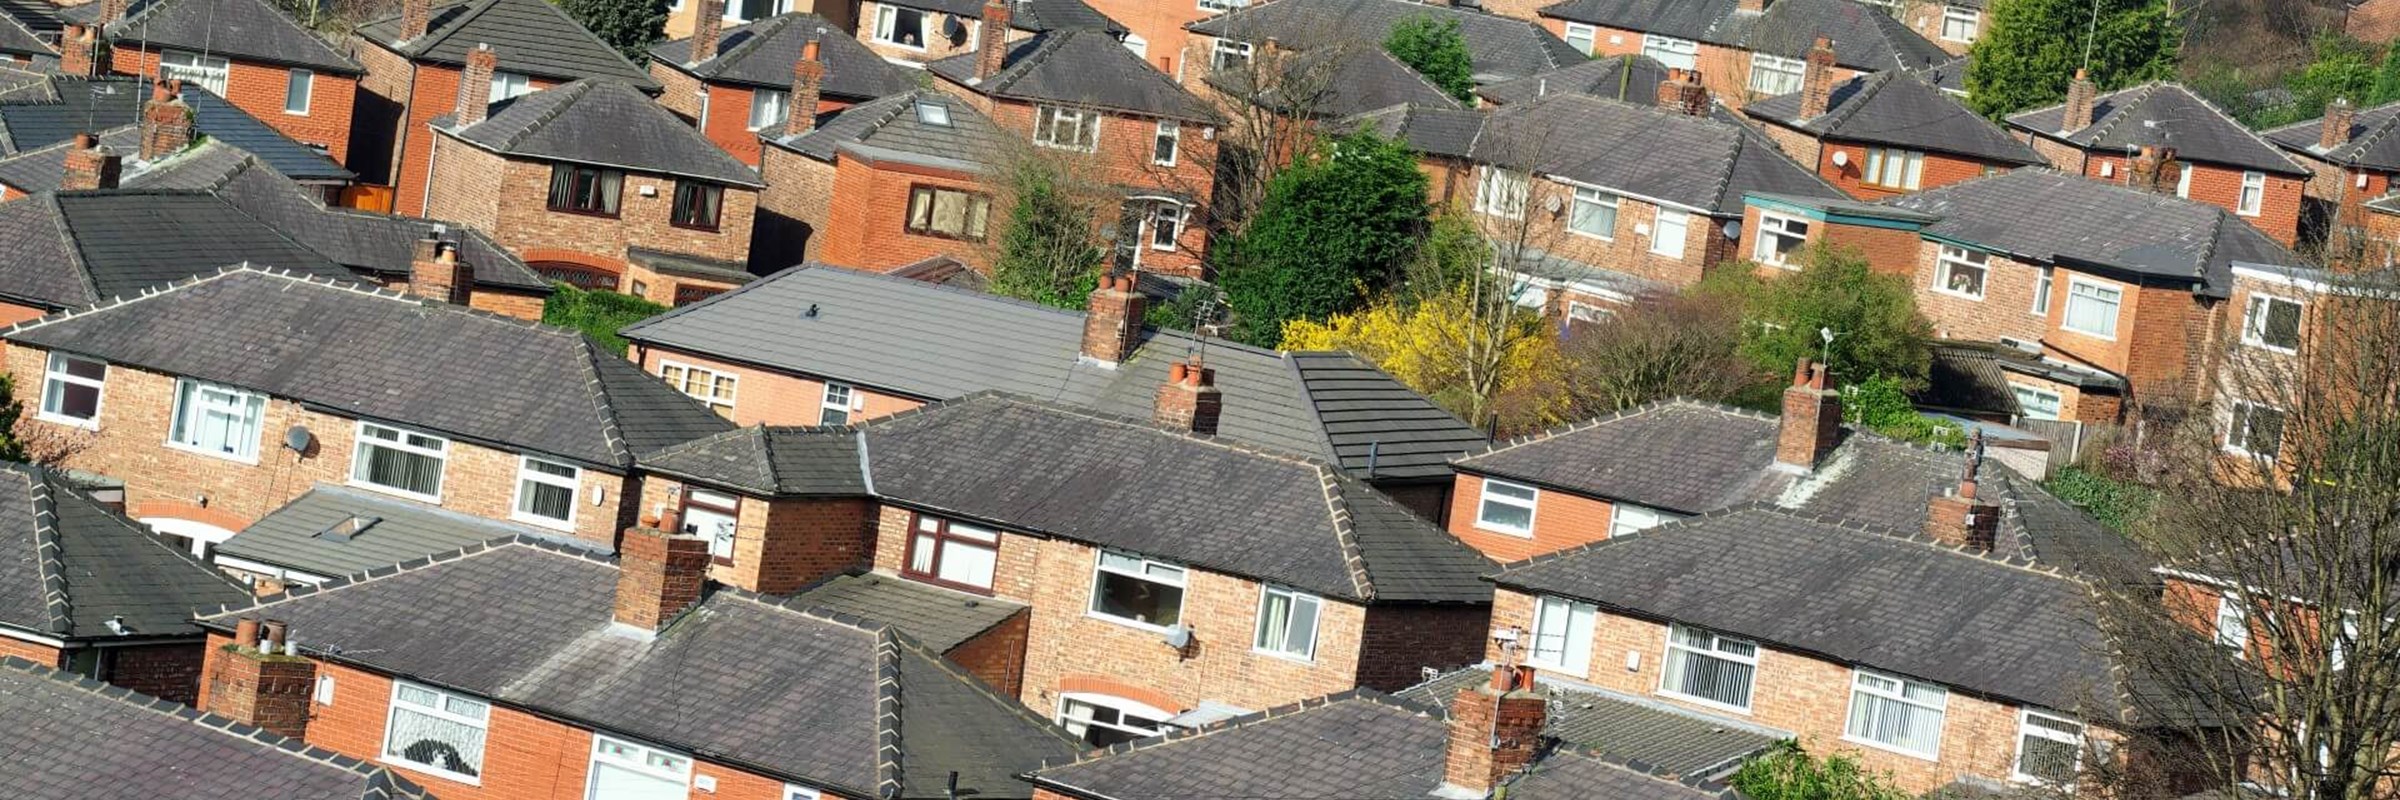 Photo of a Greater Manchester housing estate rooftops